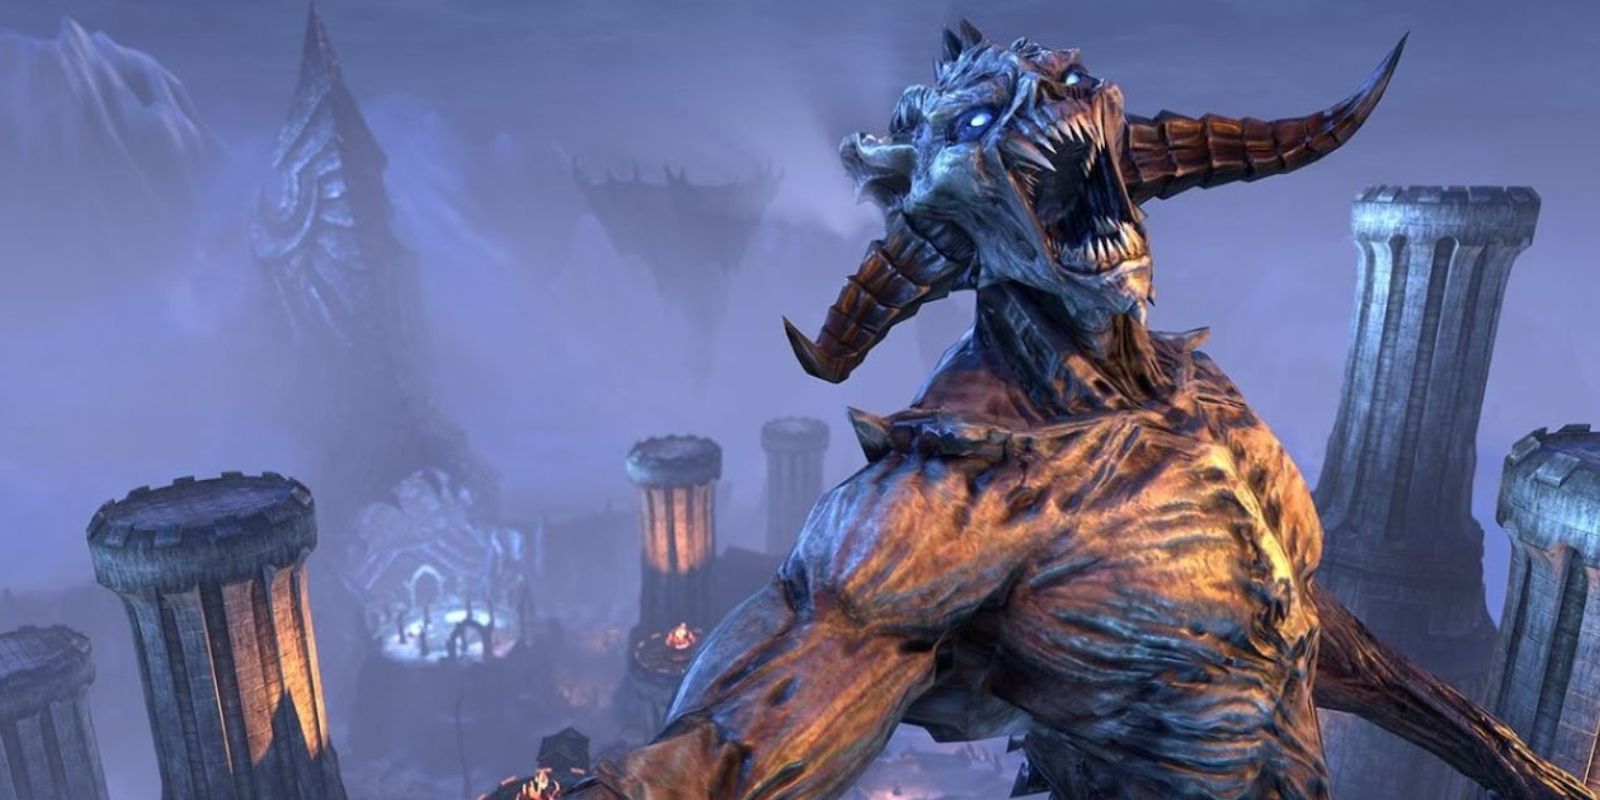 Elder Scrolls Gods &amp; Daedra That Don't Need To Appear In TES 6 Molag Bal Online